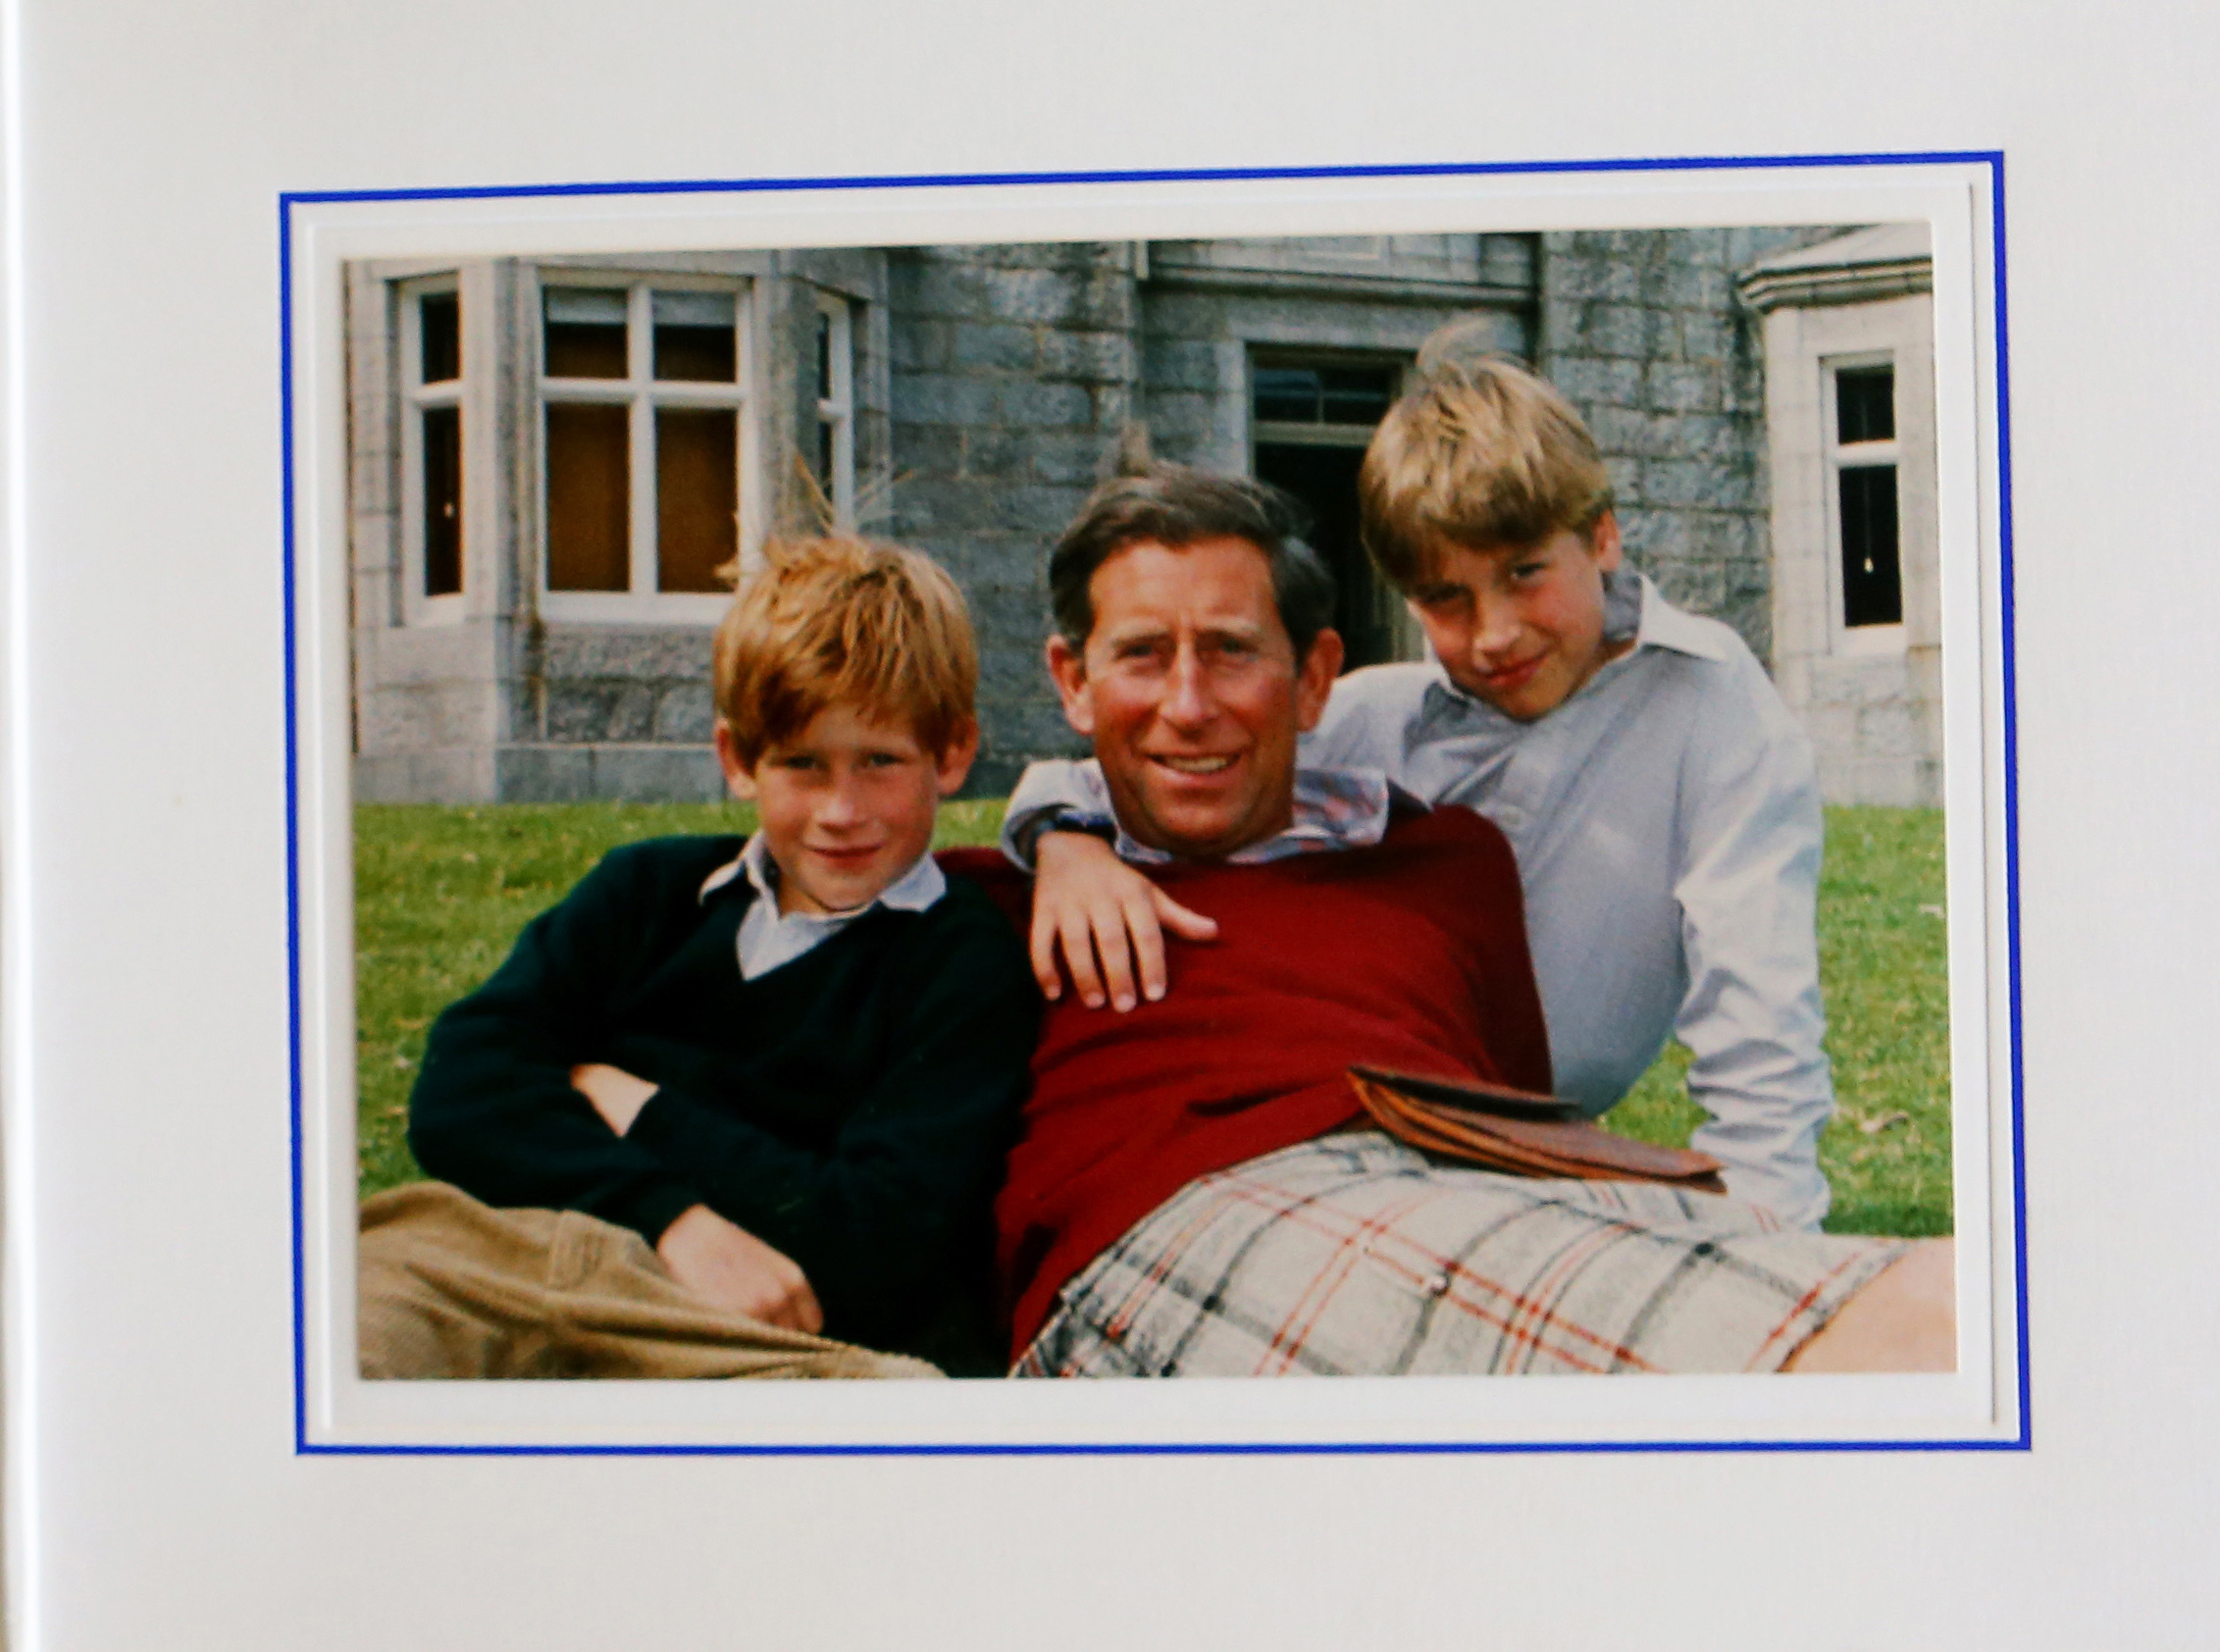 1993 Royal Christmas Card.  Prince Charles with his children Harry and William.